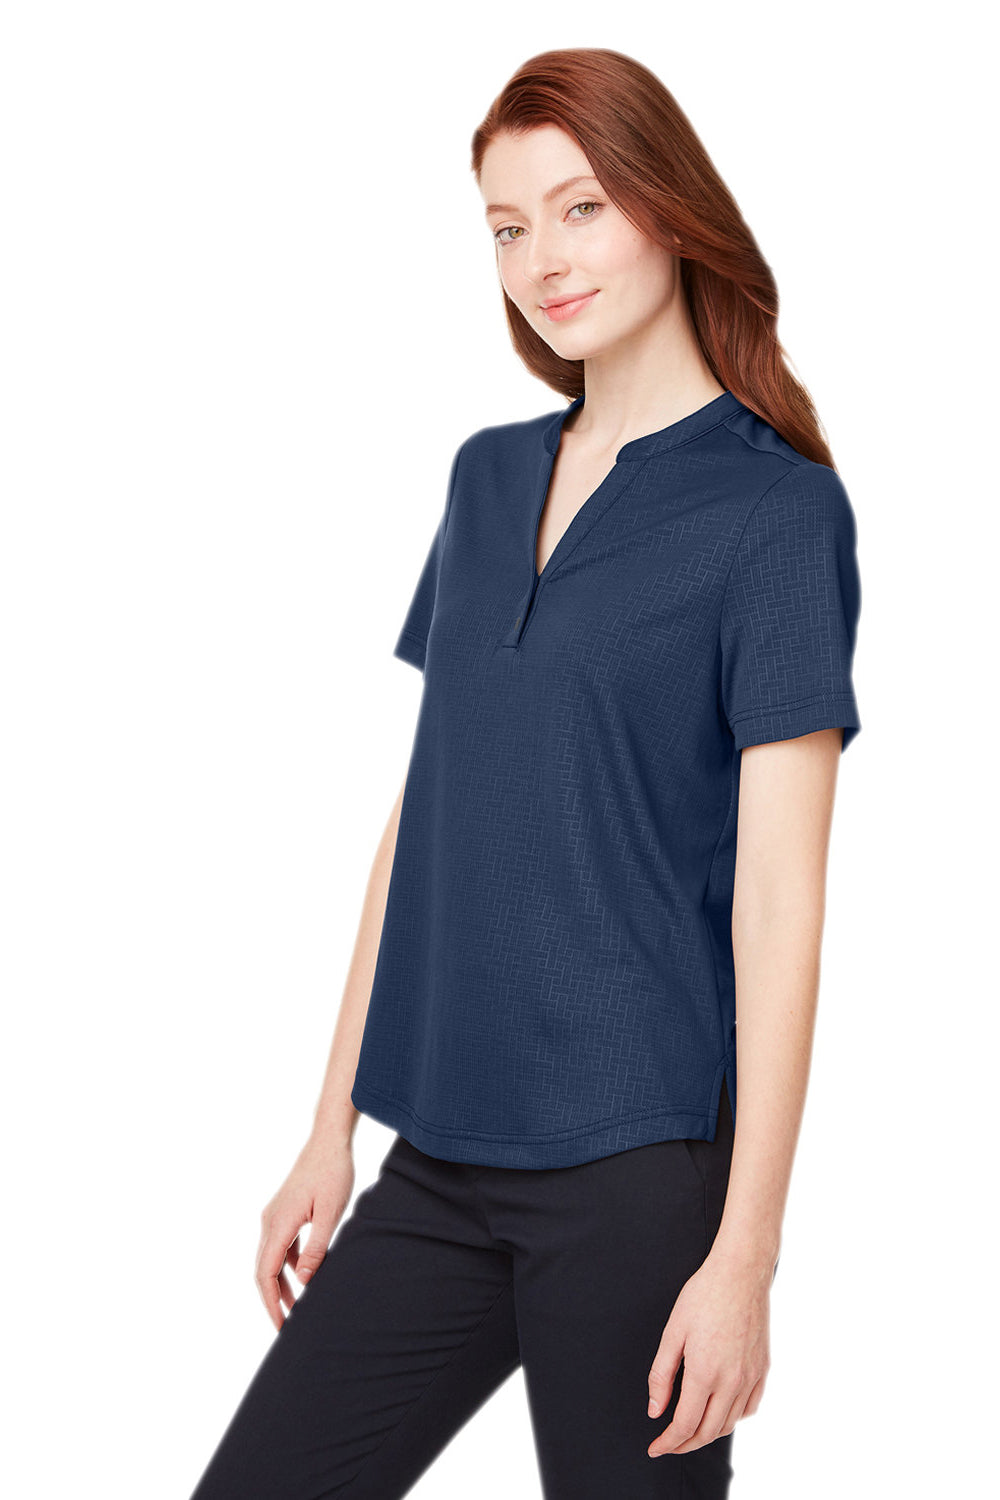 North End NE102W Womens Replay Recycled Short Sleeve Polo Shirt Classic Navy Blue 3Q